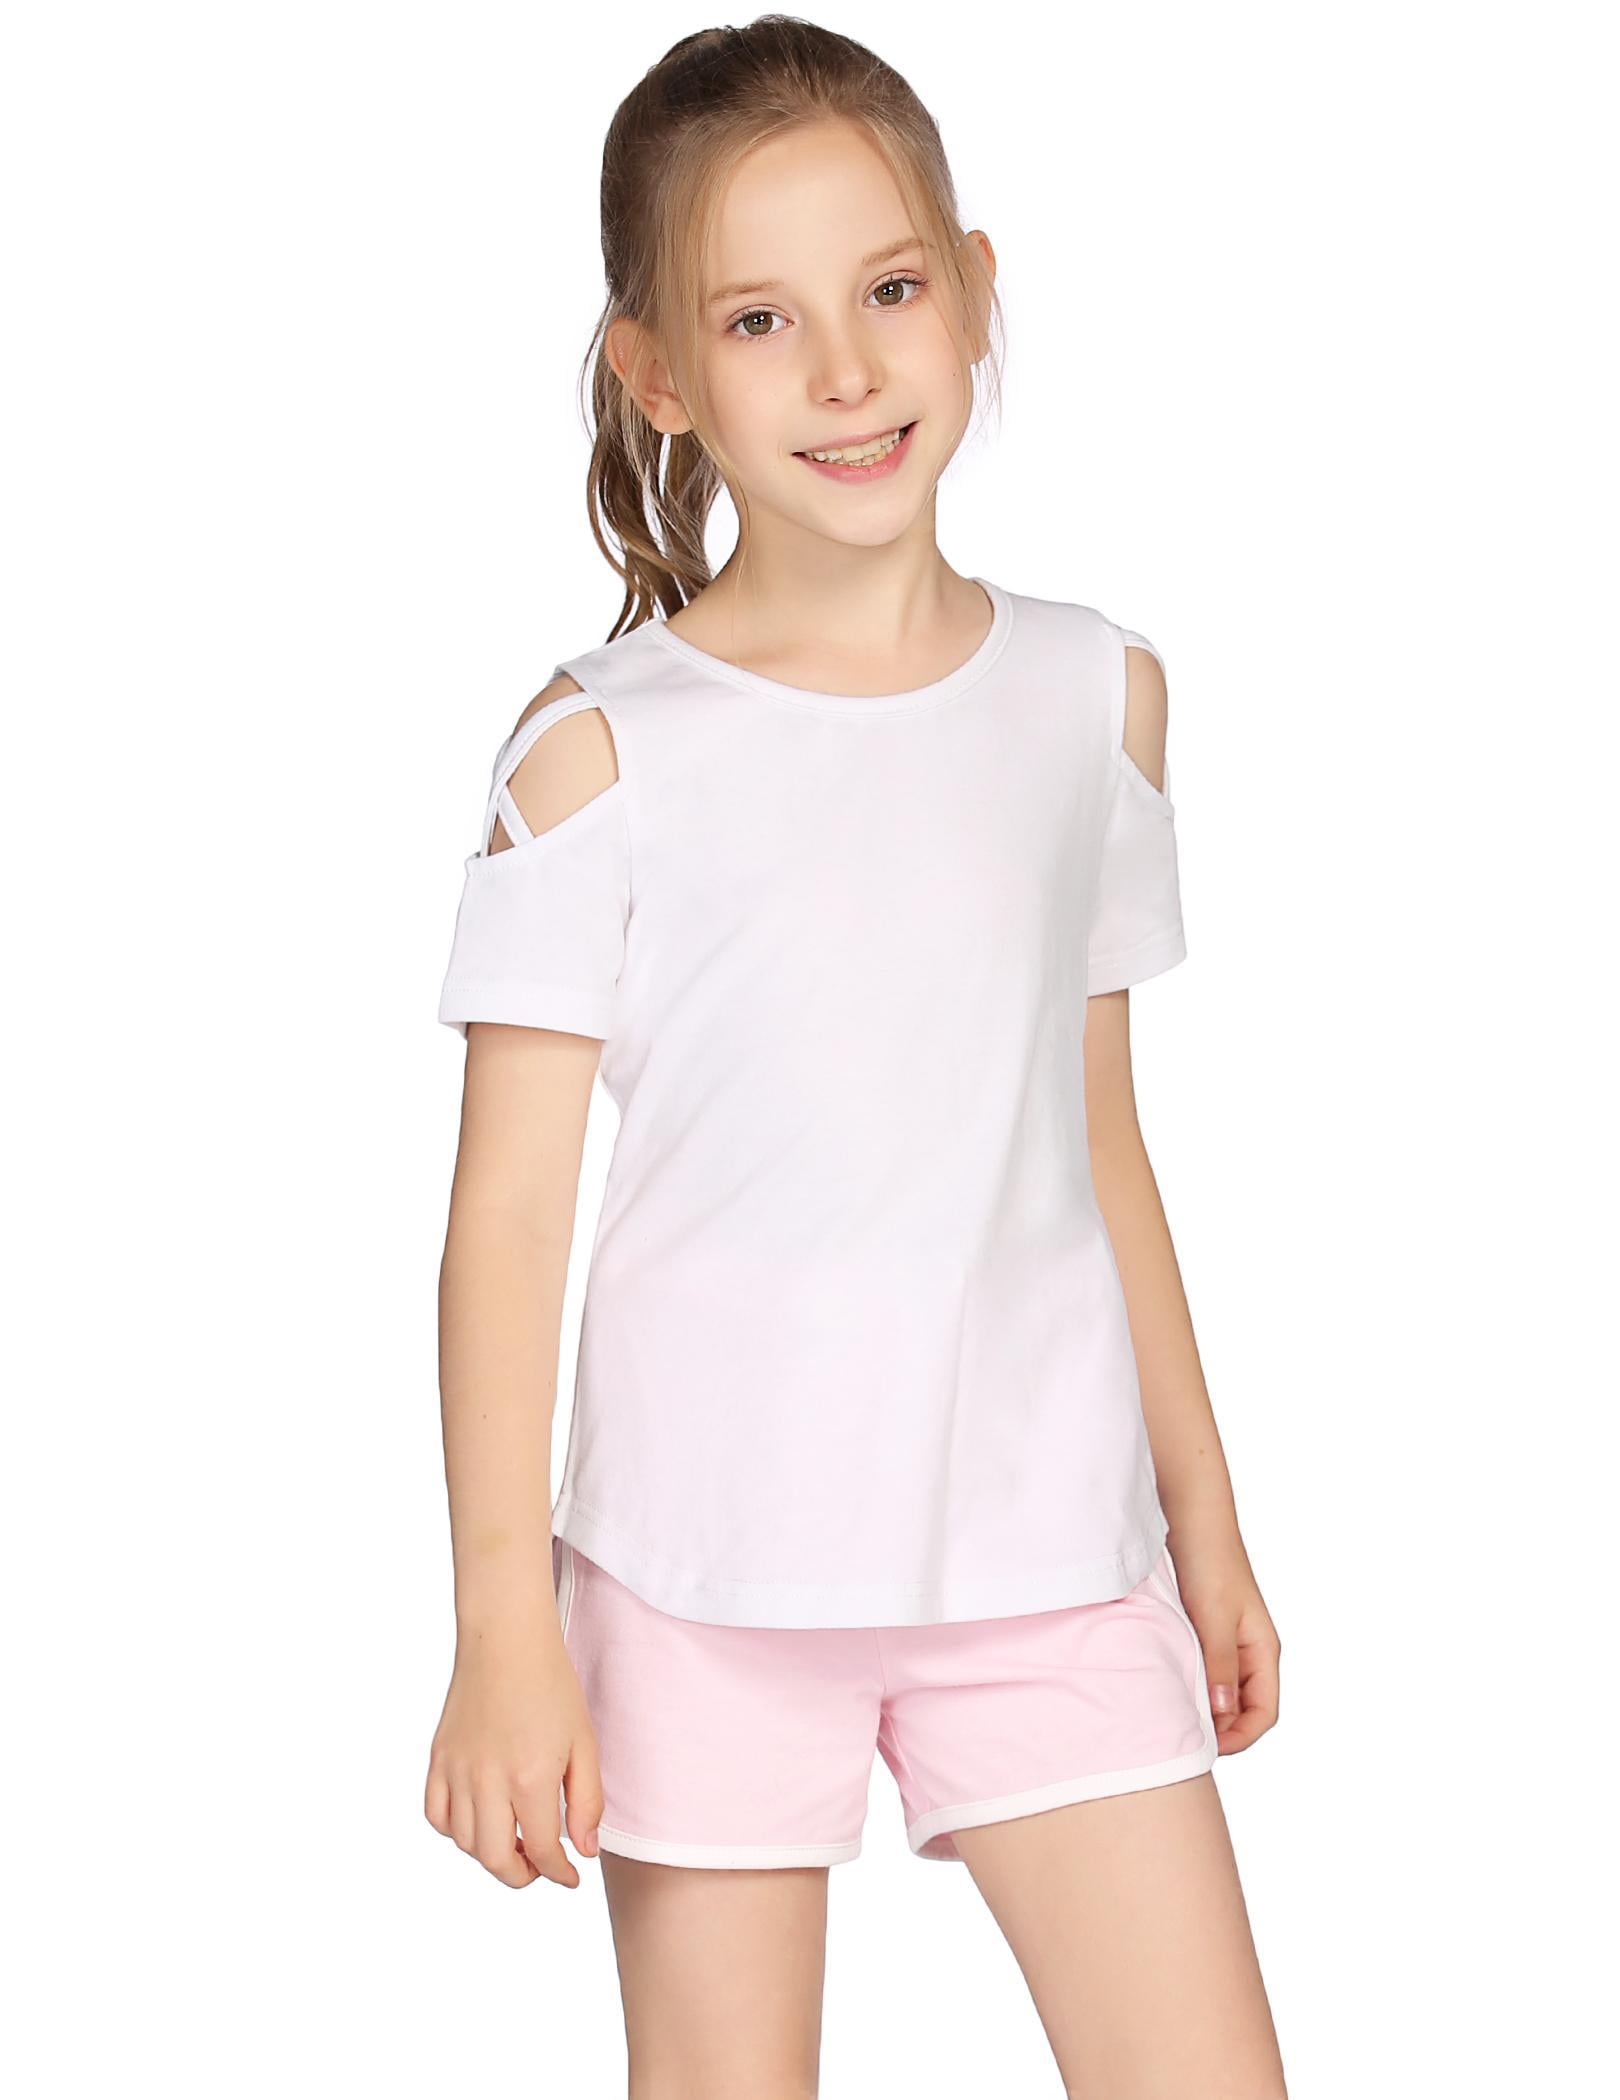 Girls Cotton Tee Tops Summer Short T-Shirt Solid Blouse with Cold Shoulder for 4-12Y, Clearance - Walmart.com